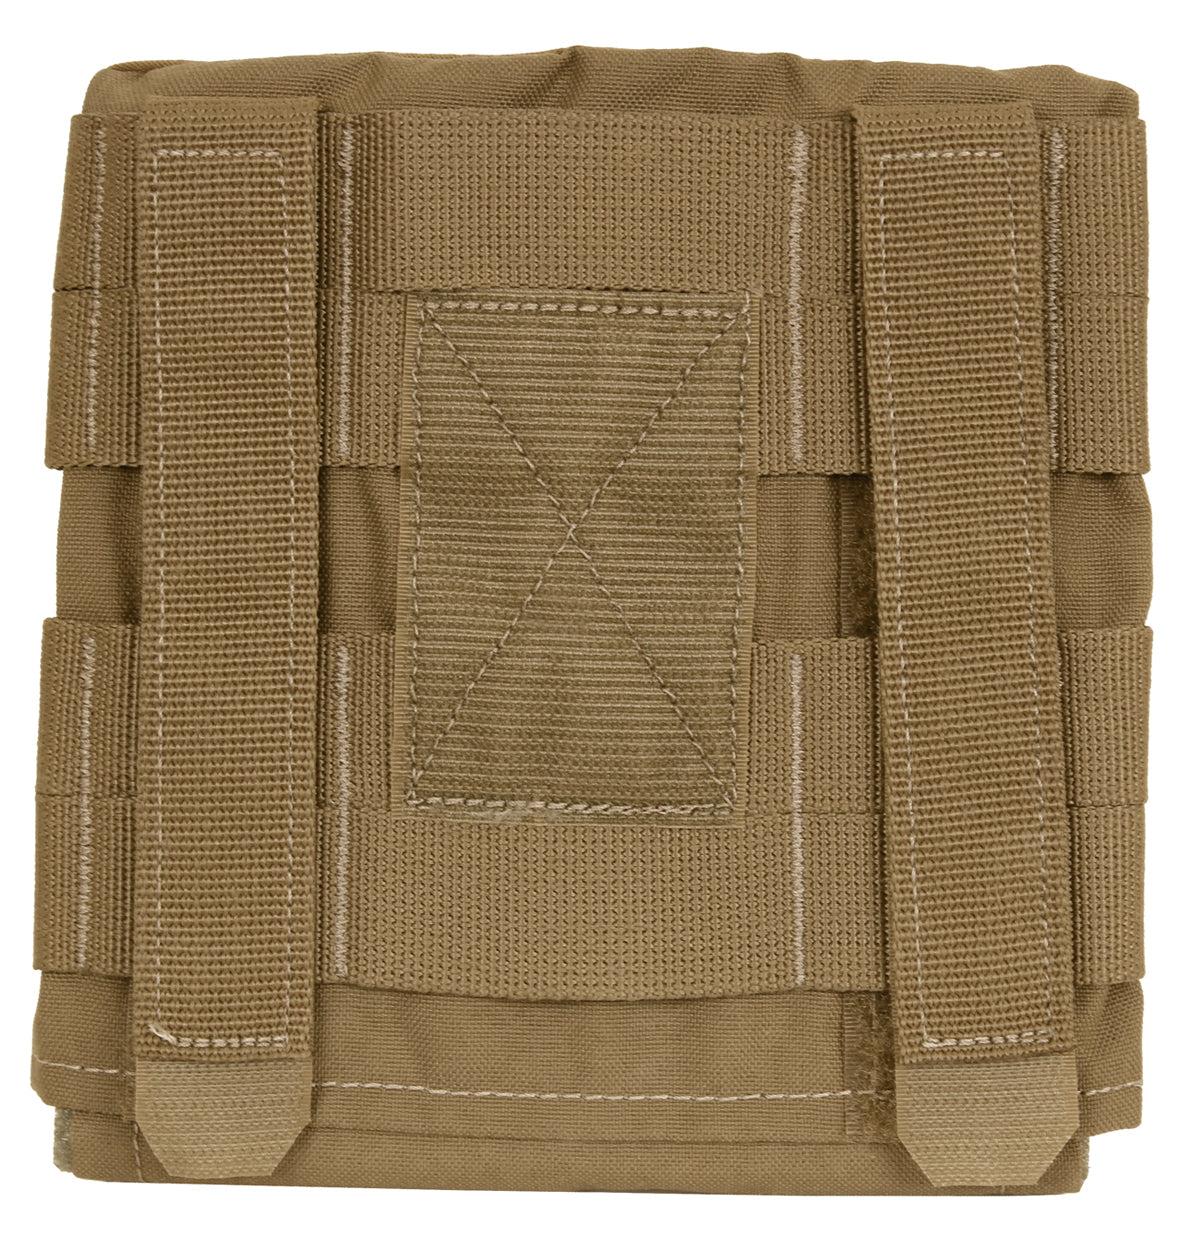 Rothco LACV (Lightweight Armor Carrier Vest) Side Armor Pouch Set - Tactical Choice Plus